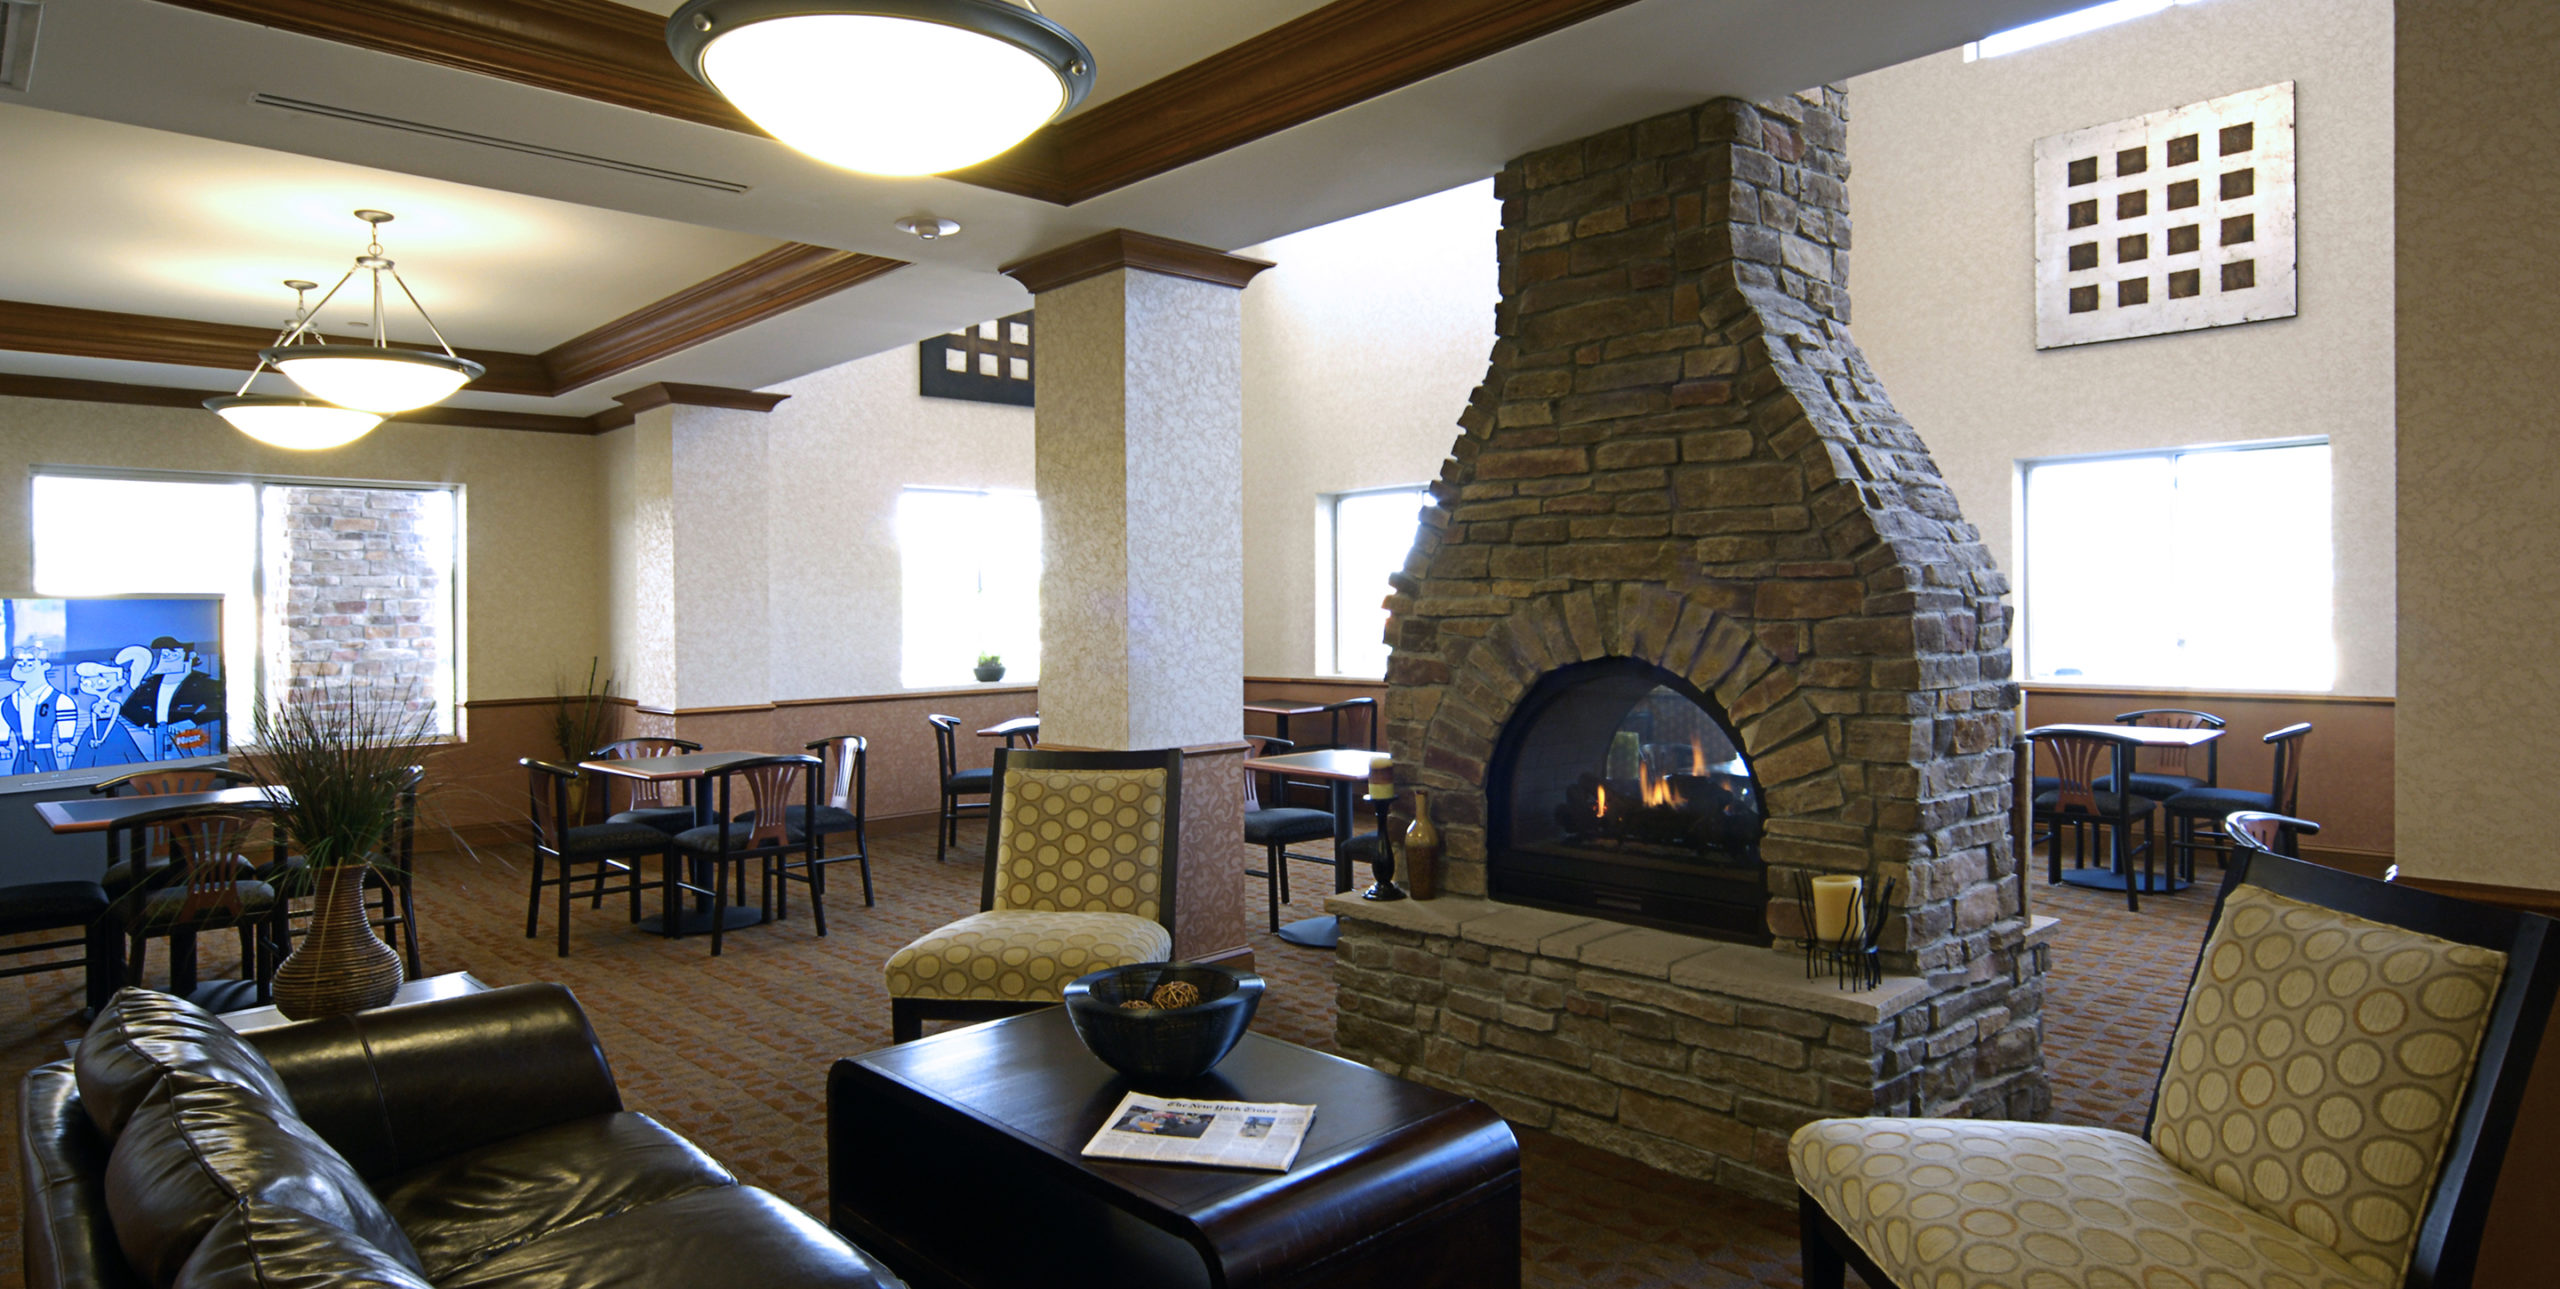 Cafe seating in front of a fireplace at Holiday Inn Express at 1707 Old Country Road, Riverhead